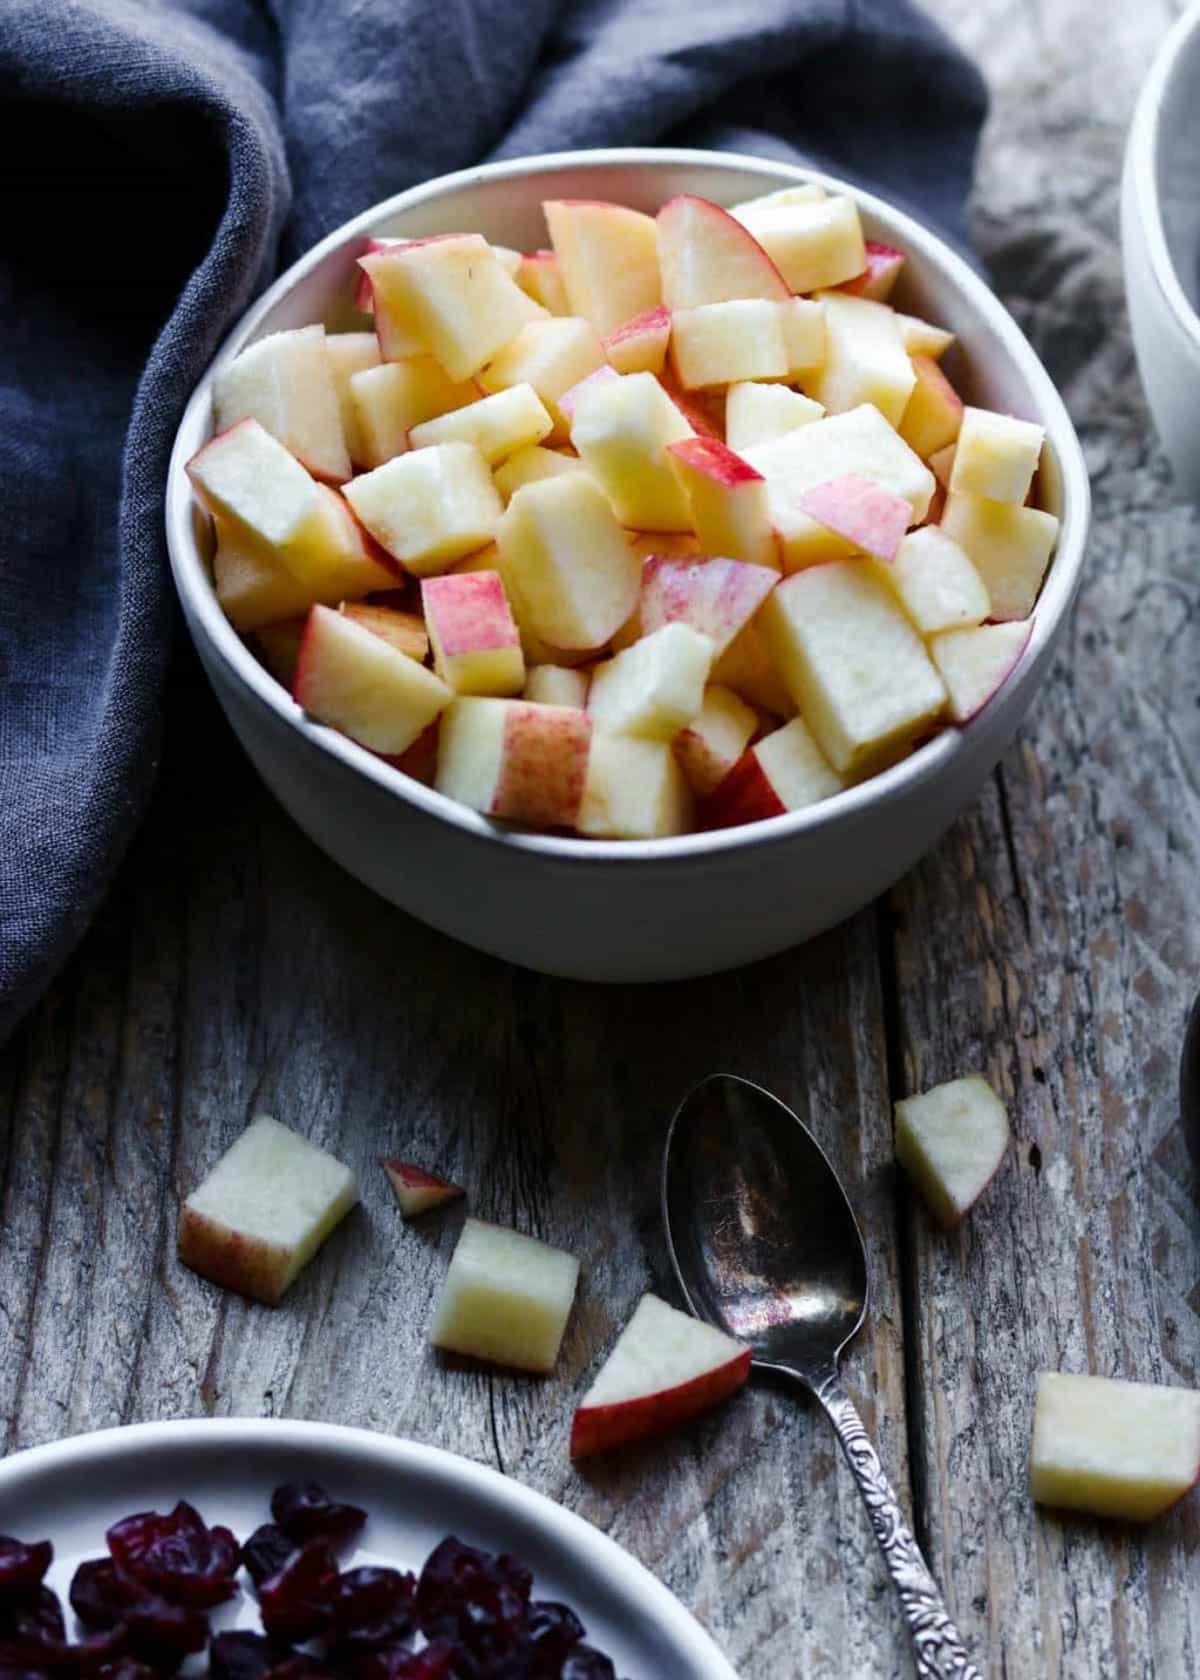 apples and raisins in a bowl